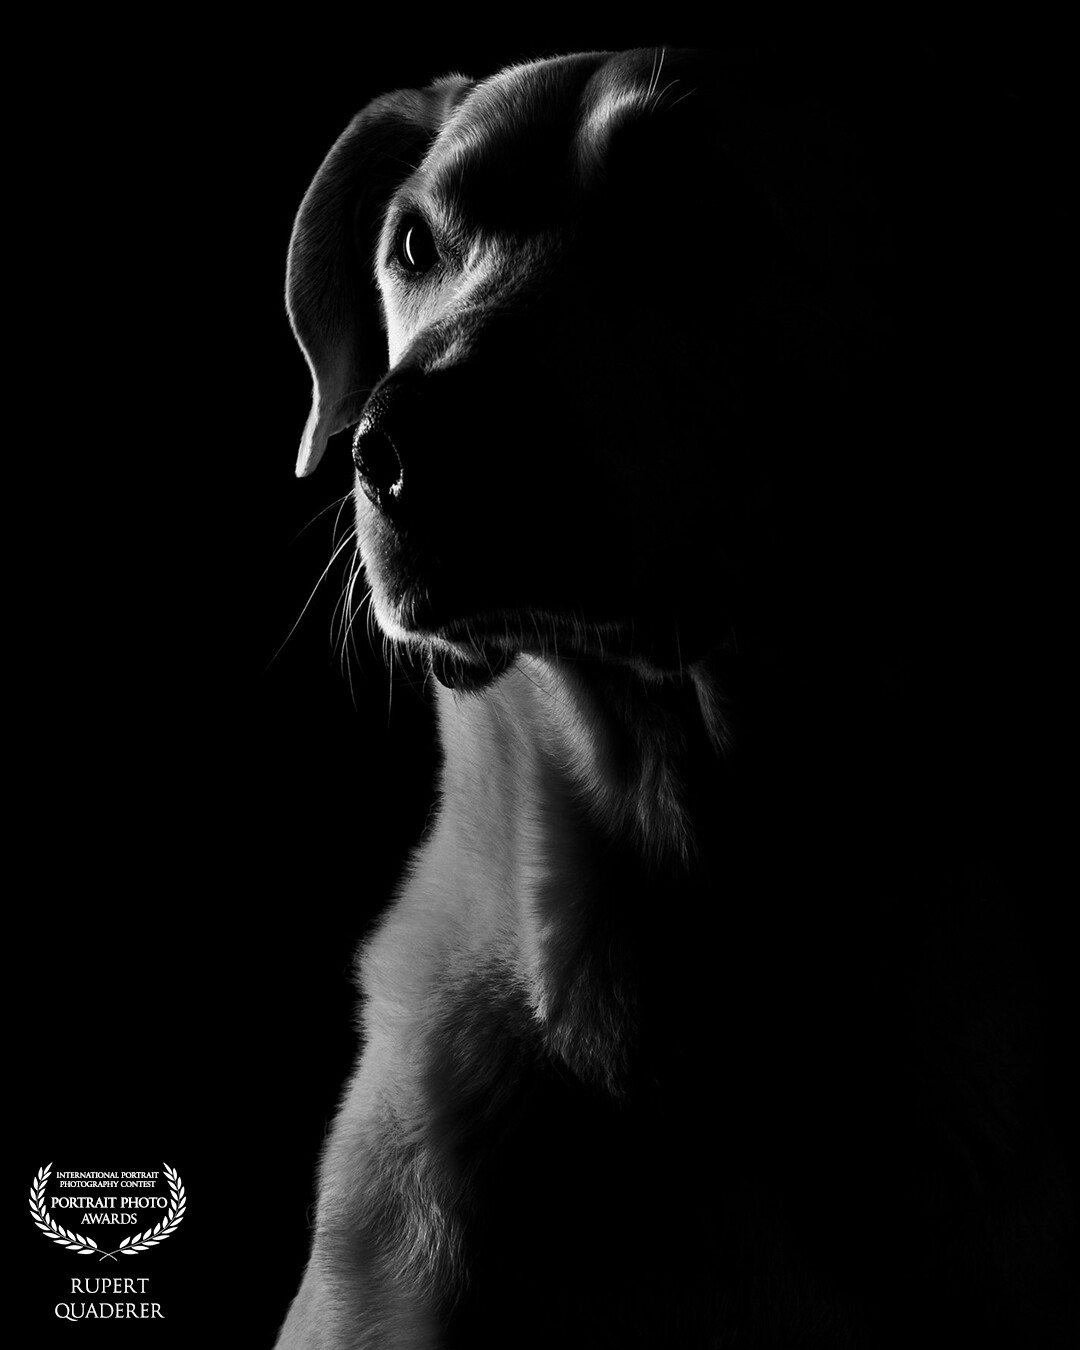 My dog Henry in my Studio. Silhouette and low light test shooting with animals.